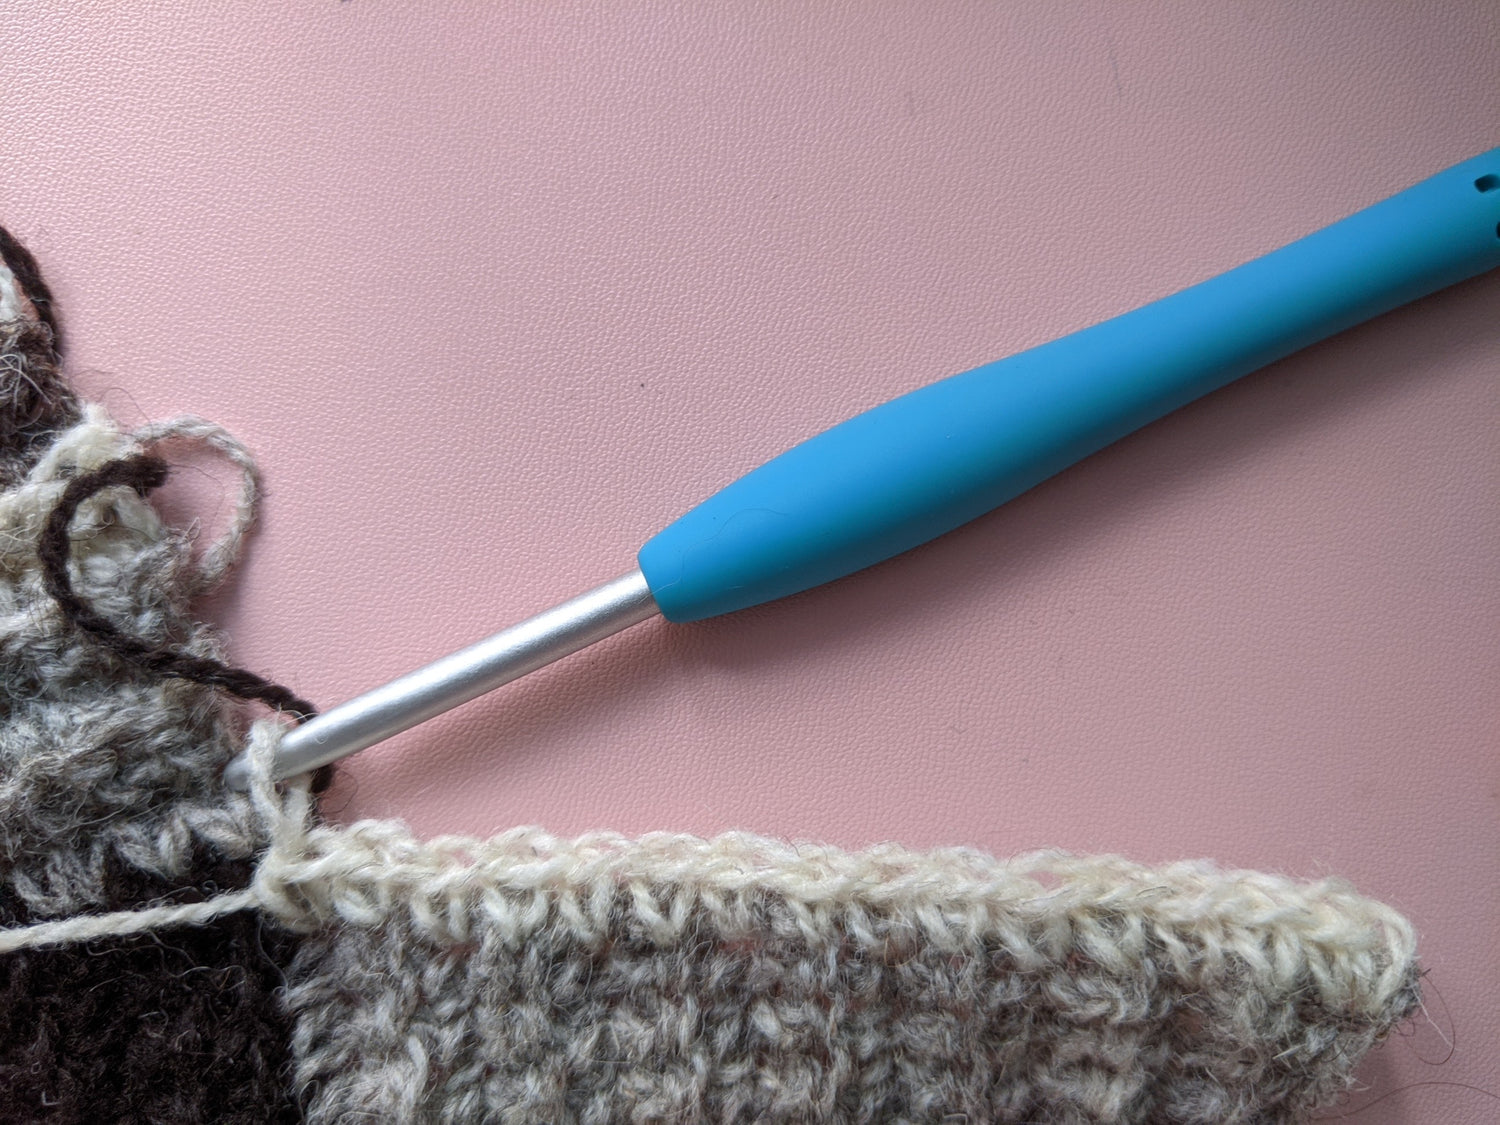 Crocheting into row ends